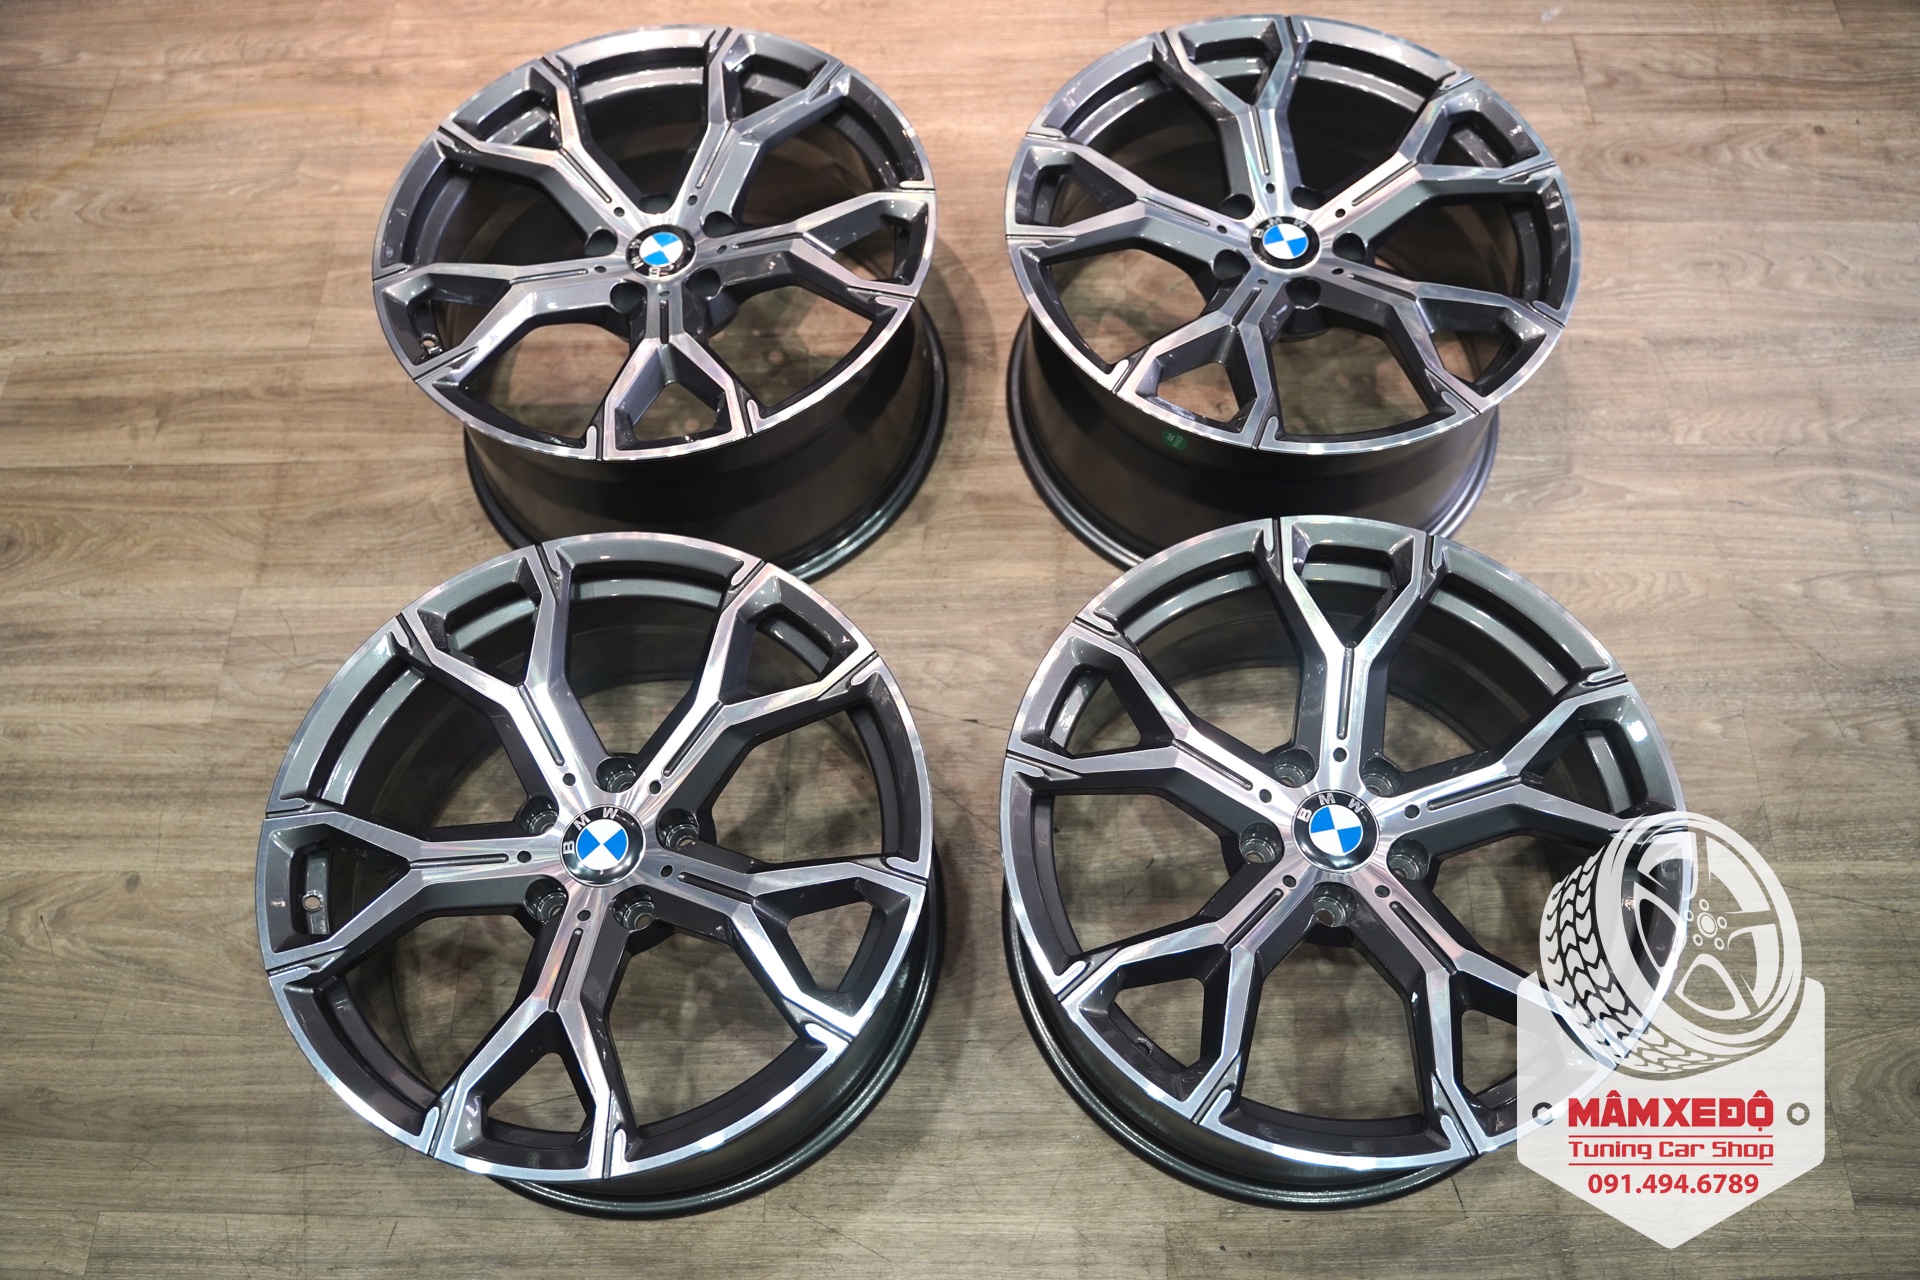 mam-xe-vinfast-forged-cnc-style-bmw-741m-19-inch